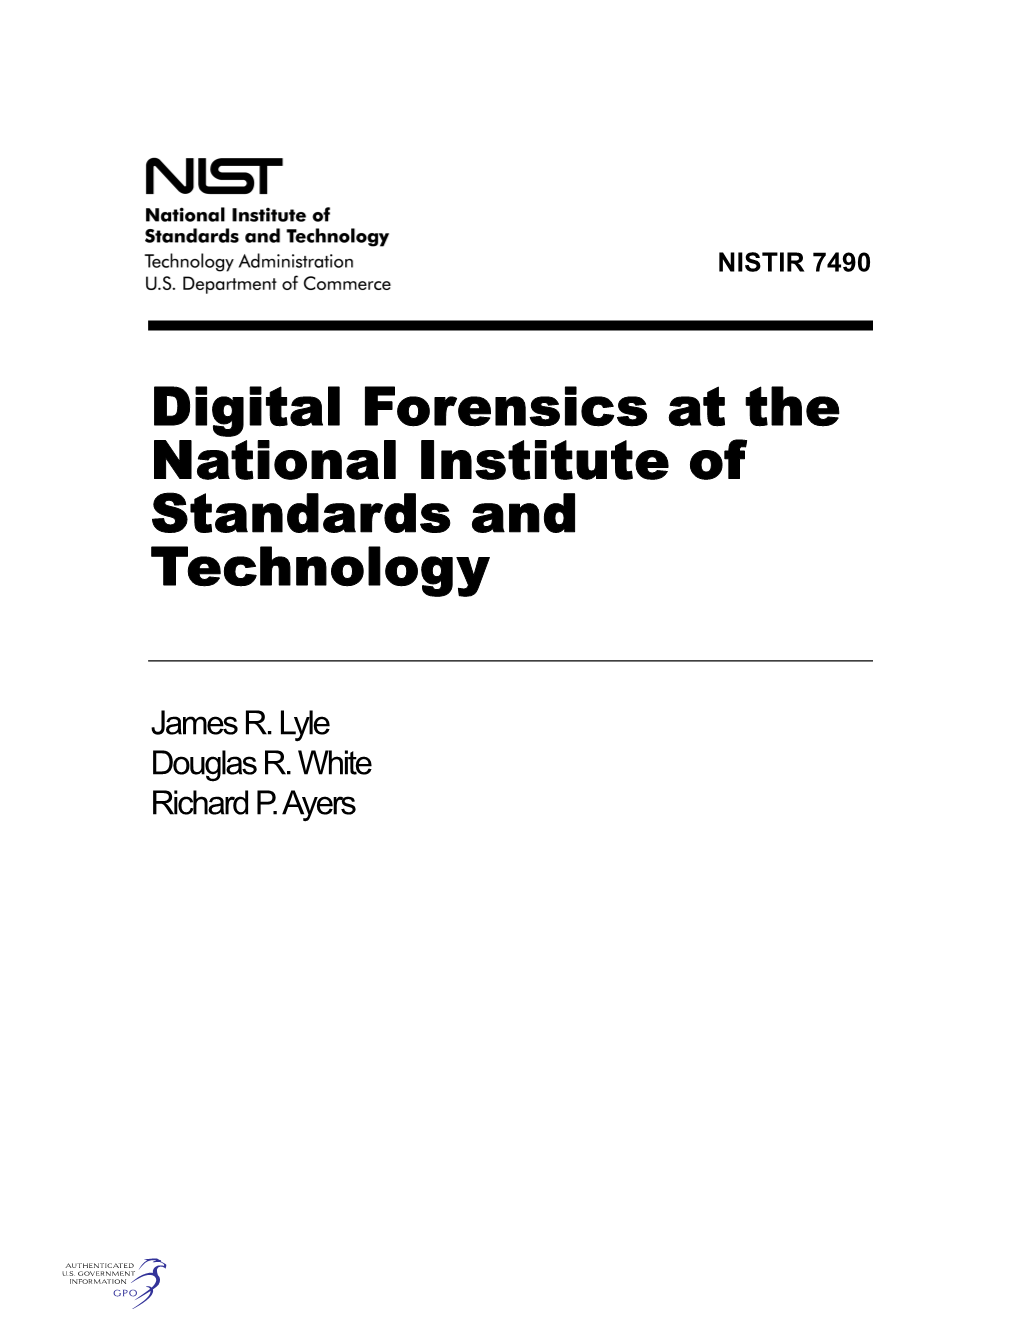 Digital Forensics at the National Institute of Standards and Technology